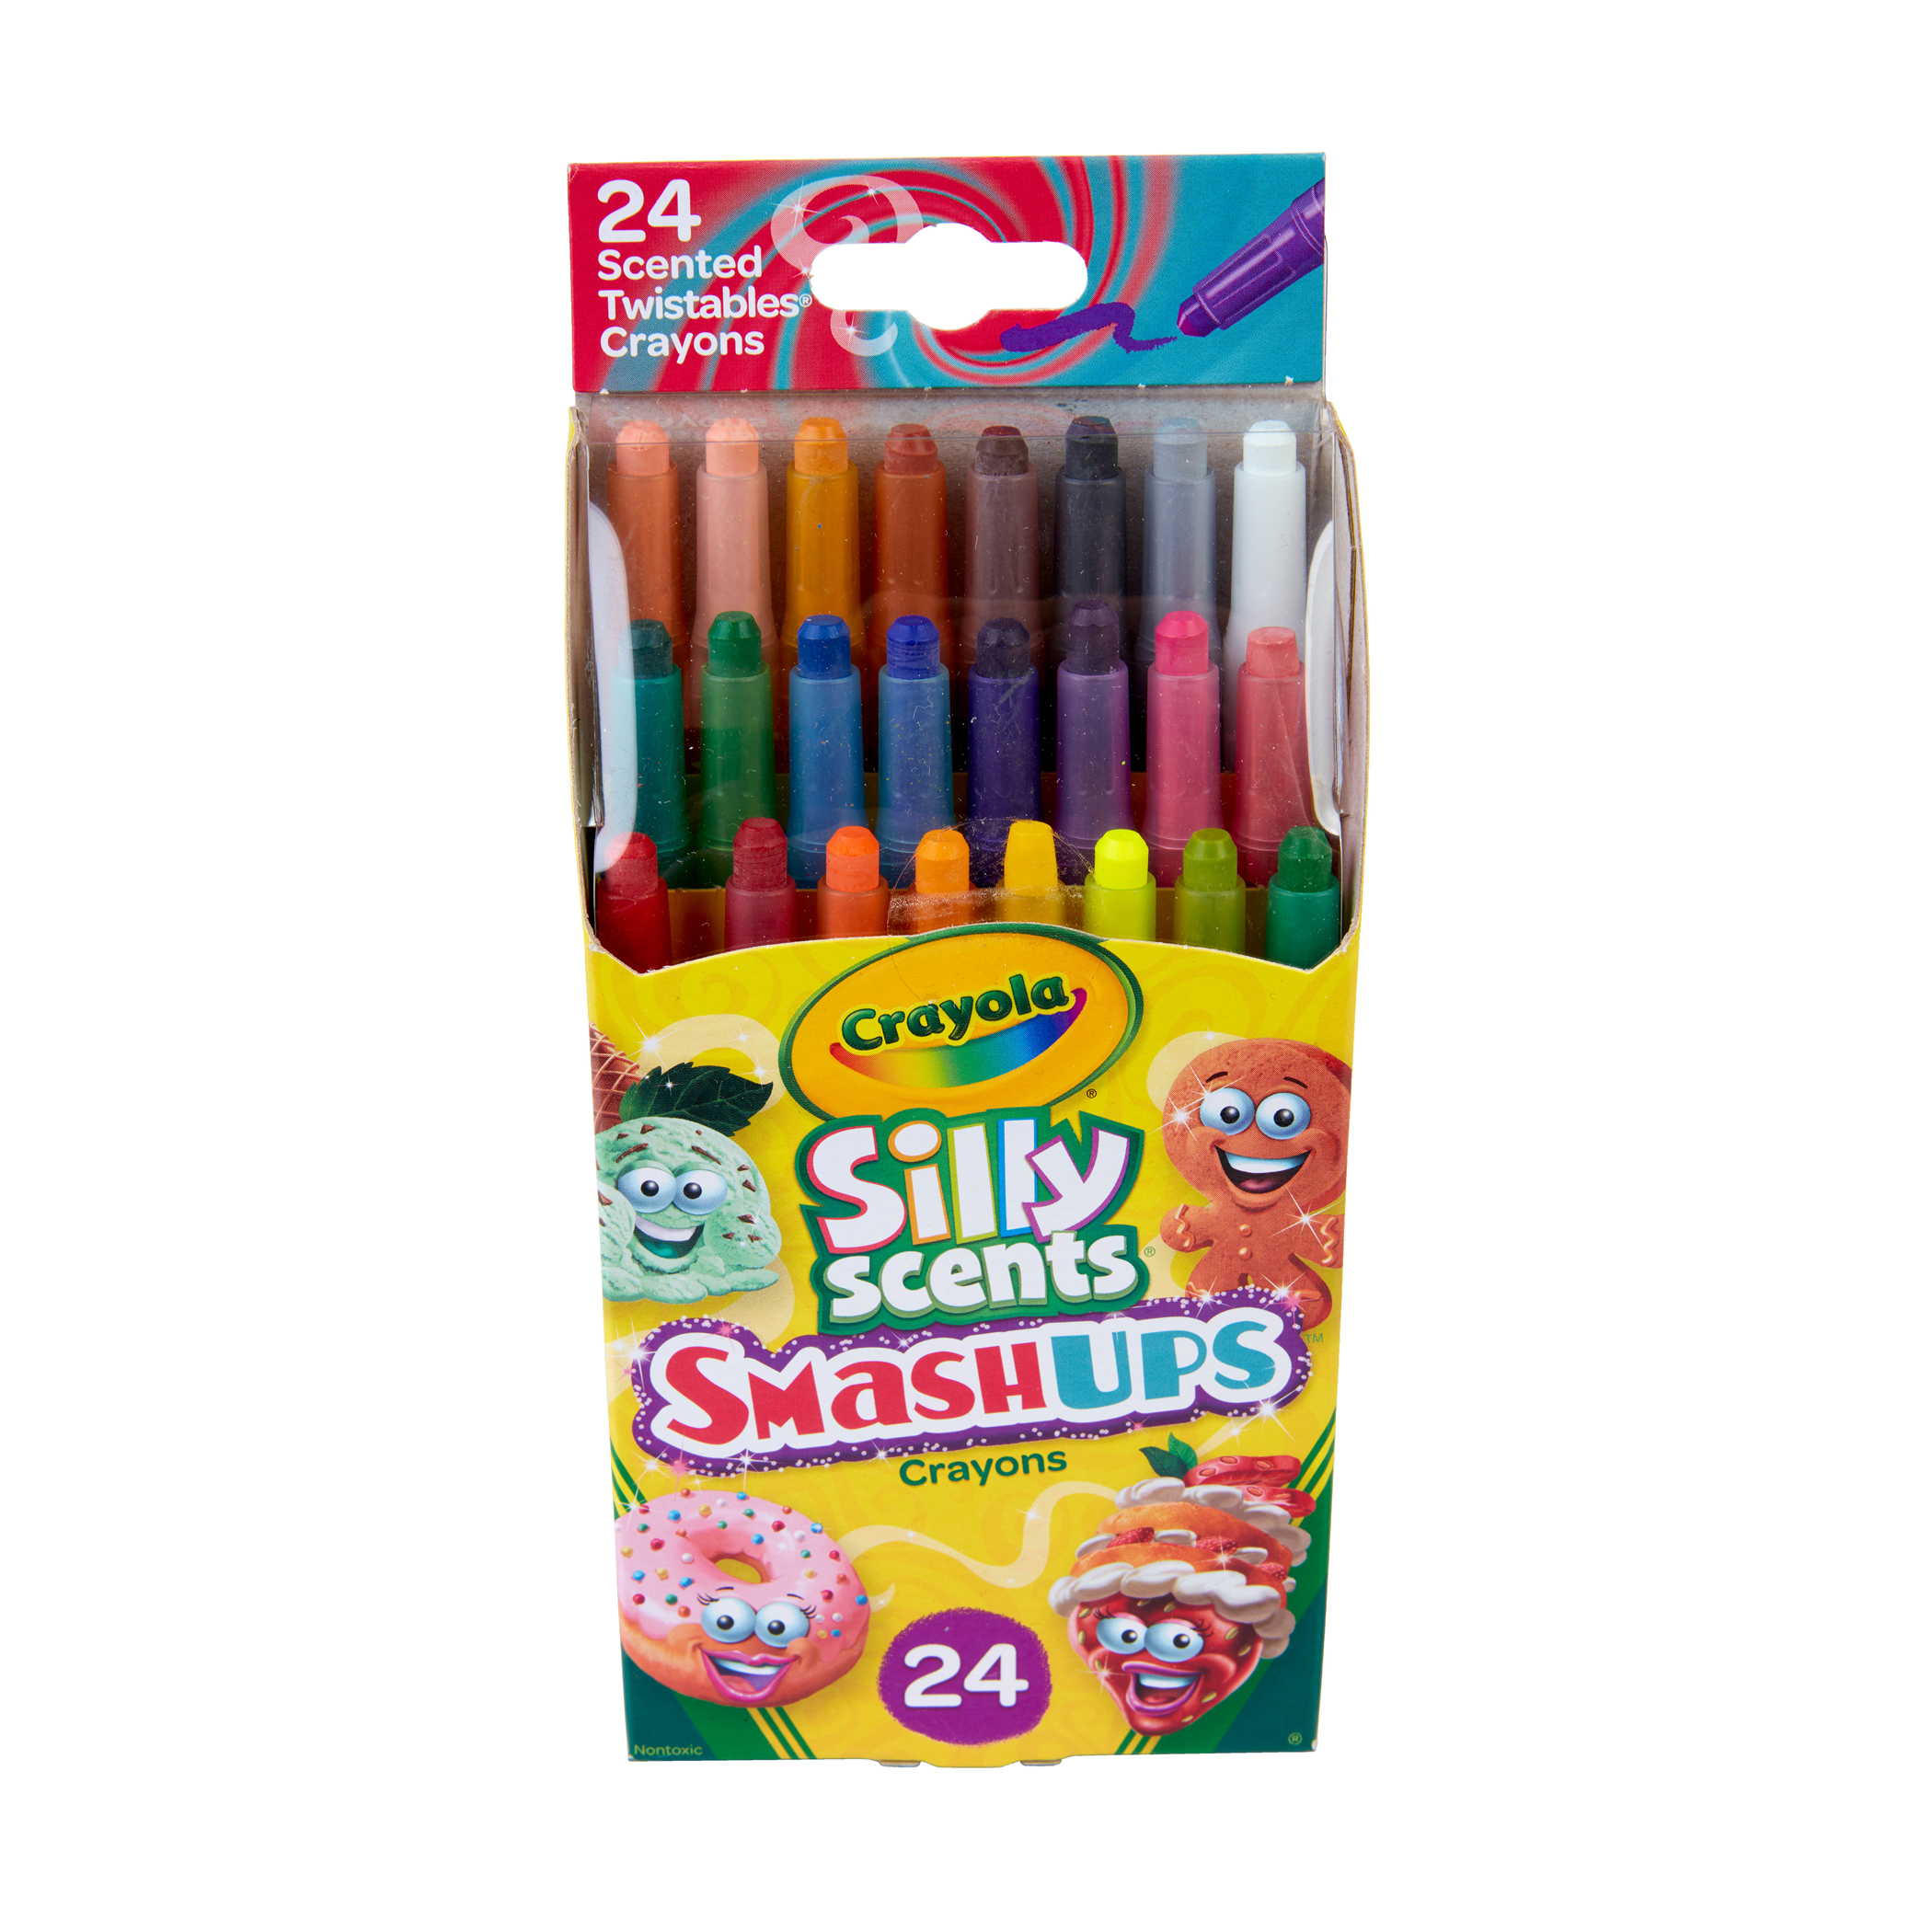 Crayola Silly Scents Twistables Crayons, Sweet Scented Crayons